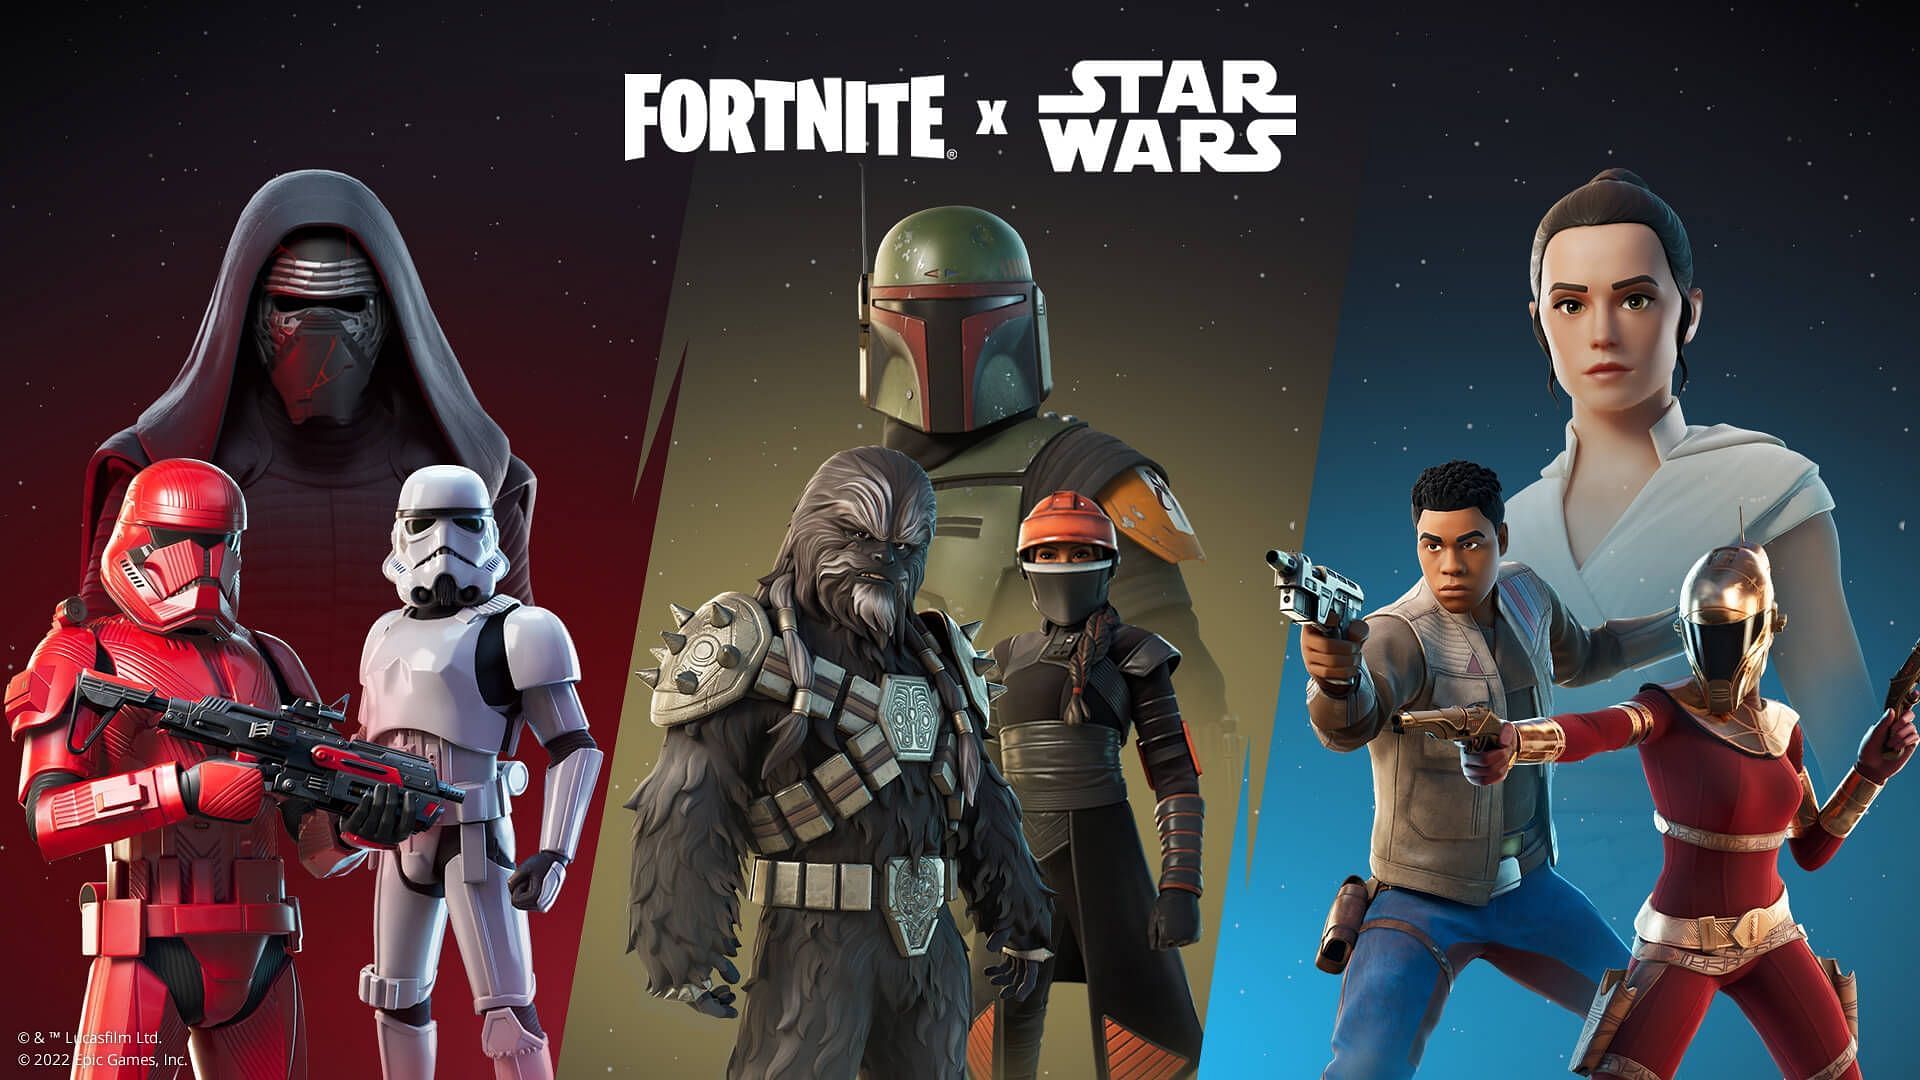 Fortnite will get more Star Wars characters in the future